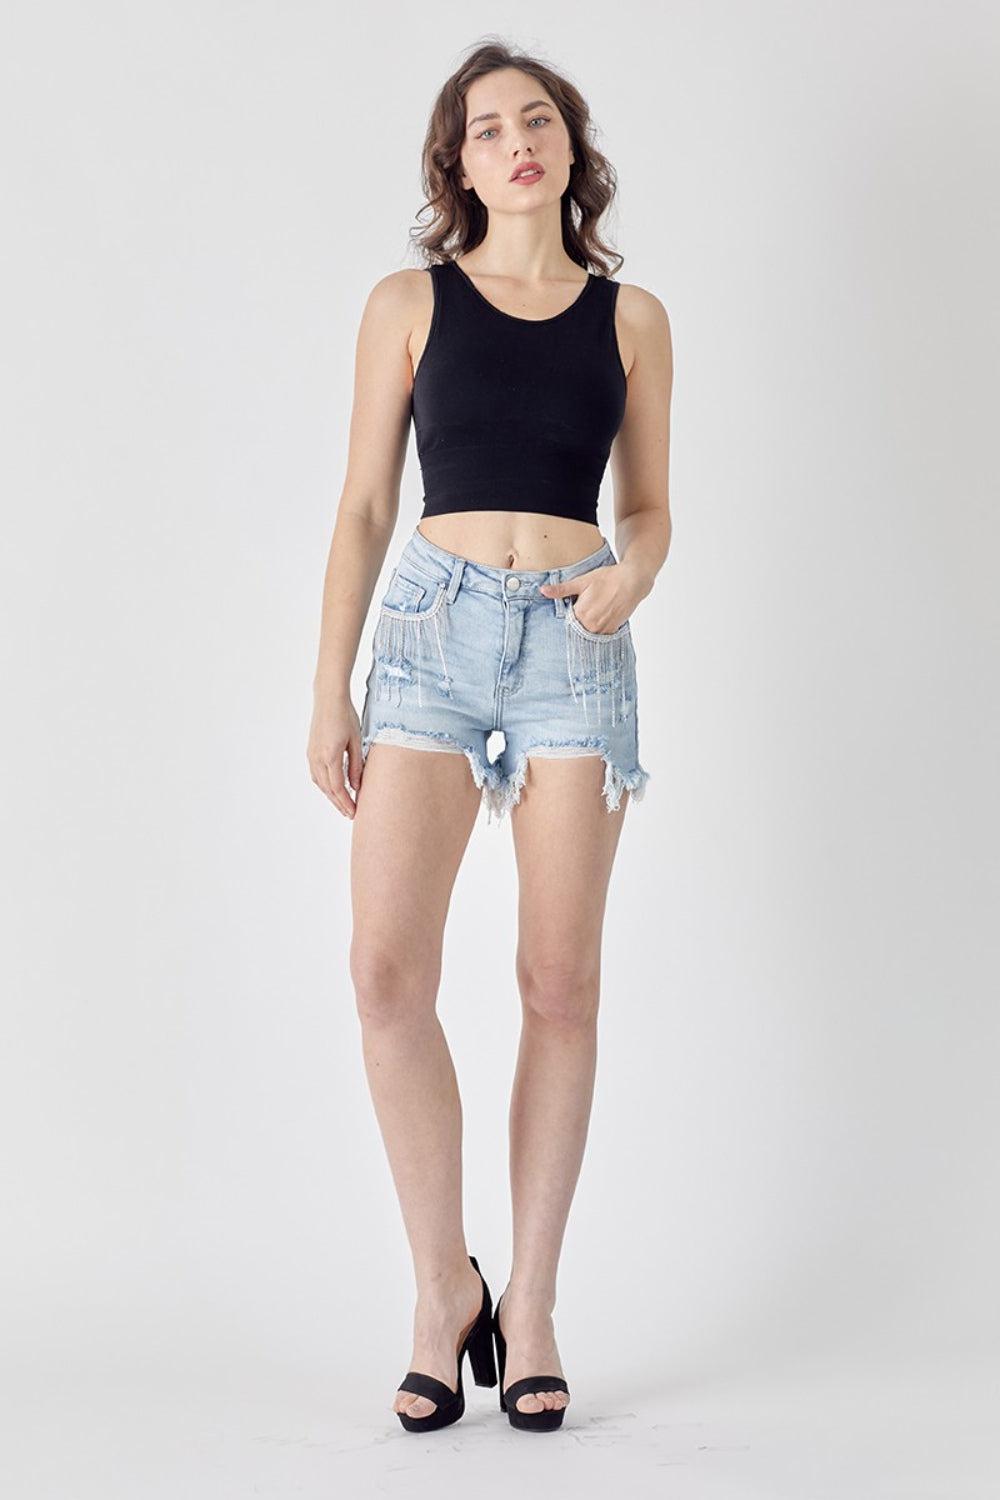 a woman wearing a black tank top and denim shorts